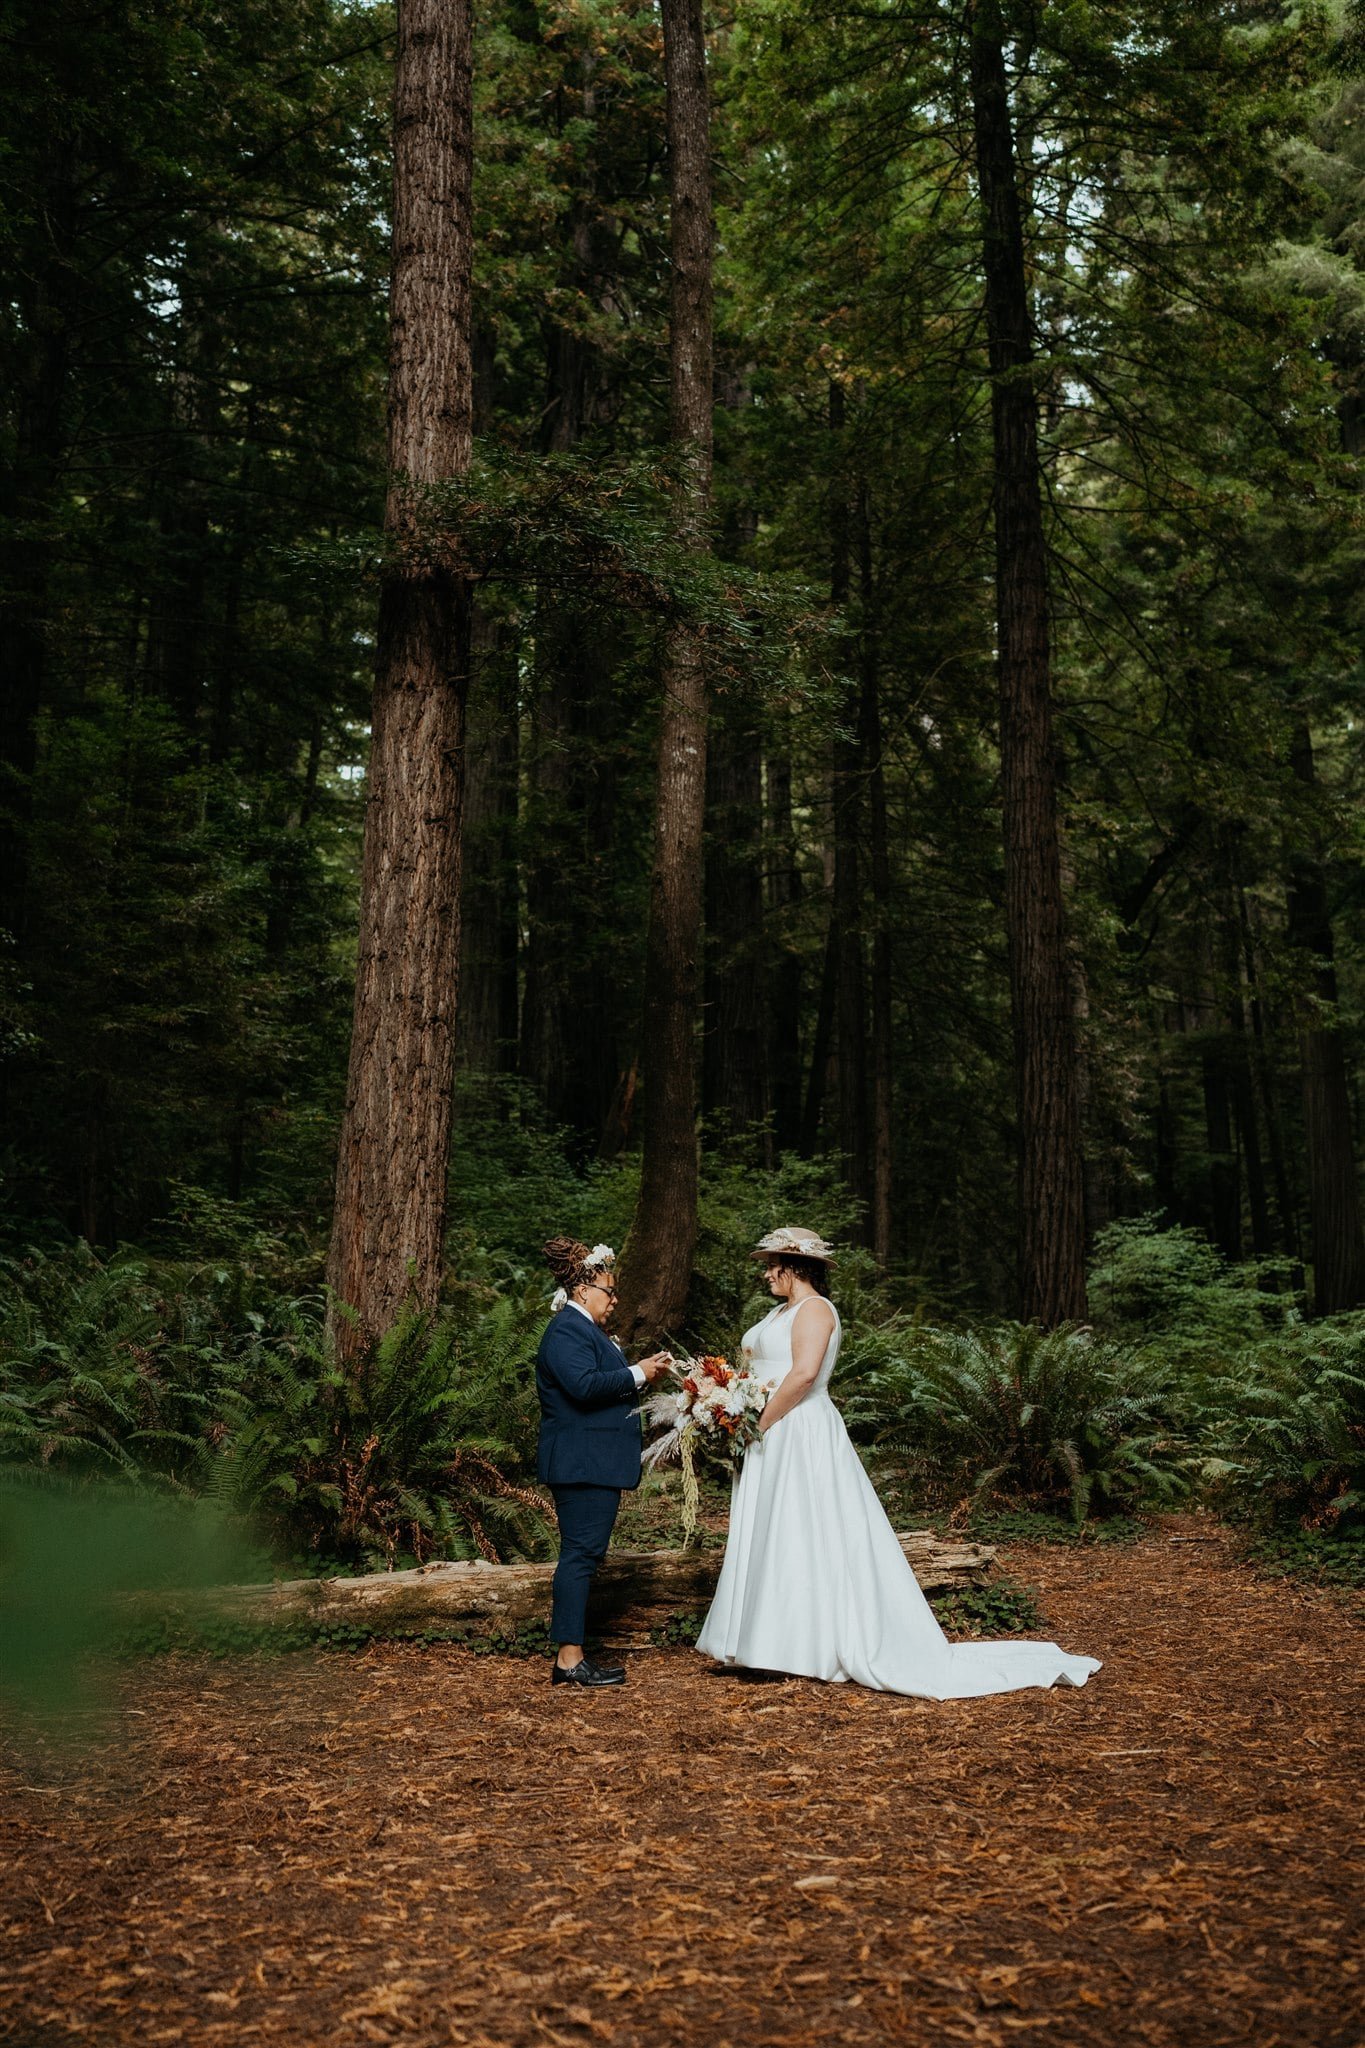 Two brides exchange vows during forest elopement ceremony on the Southern Oregon Coast